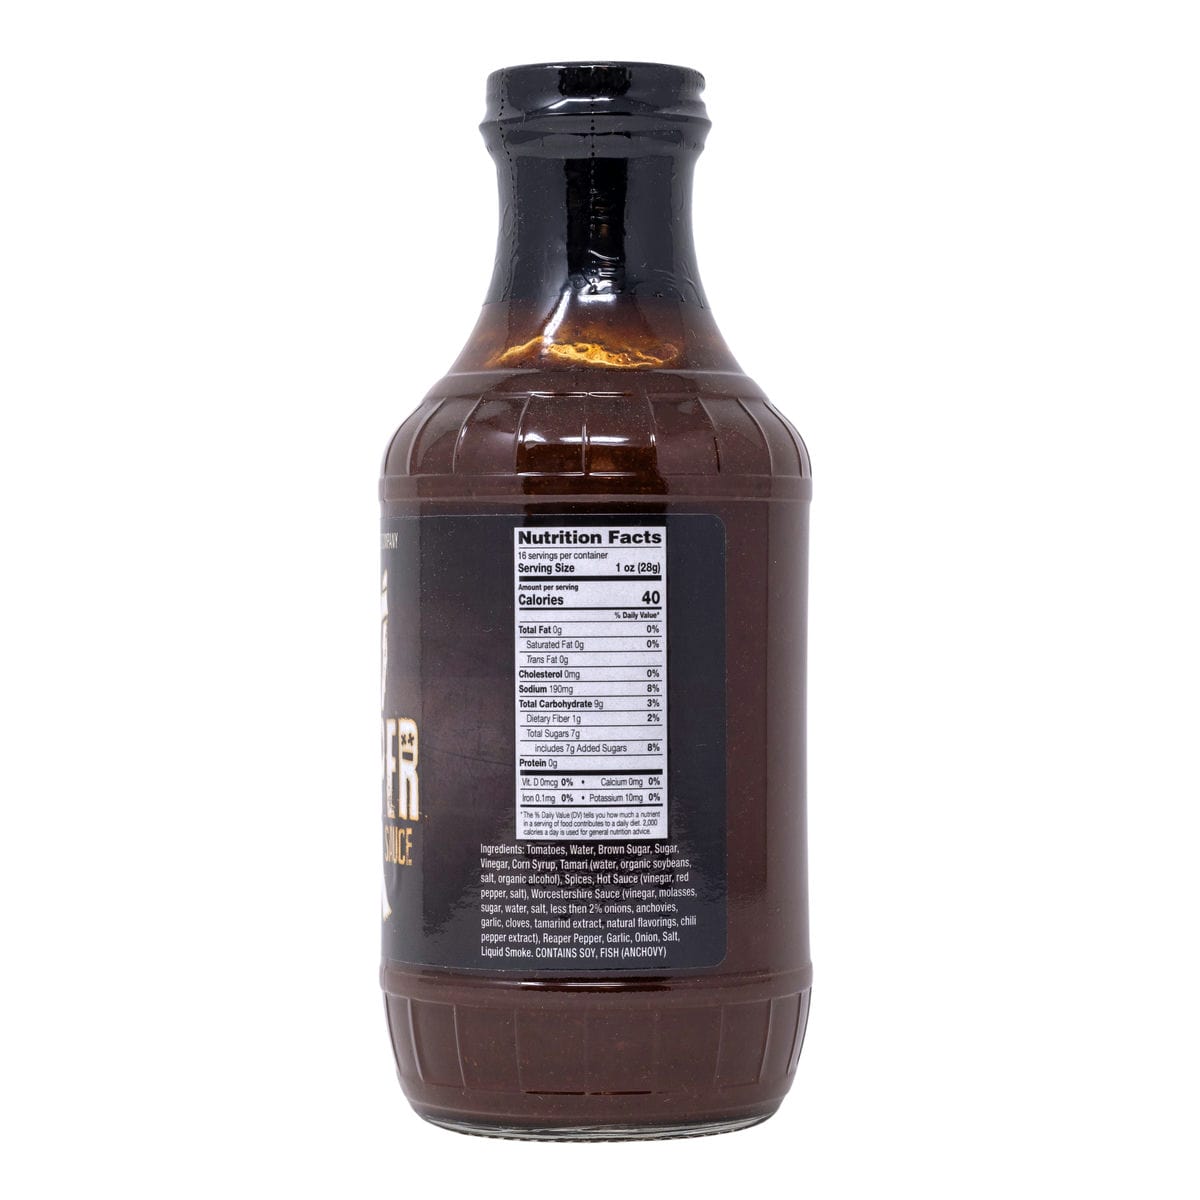 CaJohns The Reaper BBQ Sauce Nutrition